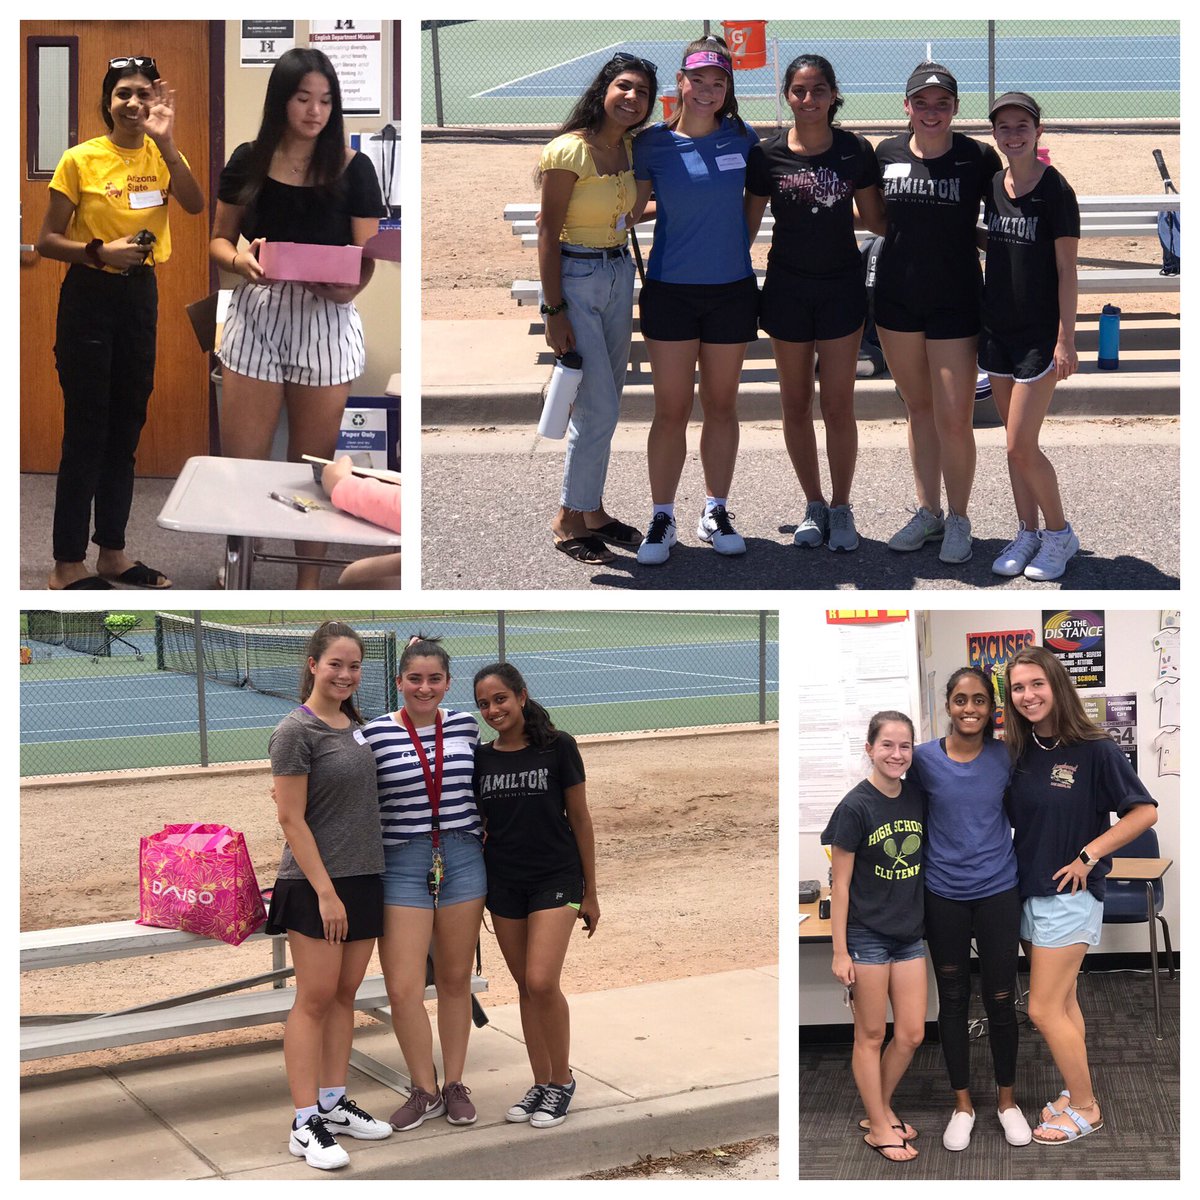 Class of 2019 stopping in for a visit before they head off to become the class of 2023! 🎾🎓❤️#LadyHuskiesTennis #Family #OnceAHusky #AlwaysAHusky #Team #Tennis #HHS #Hamilton #HuskyProud